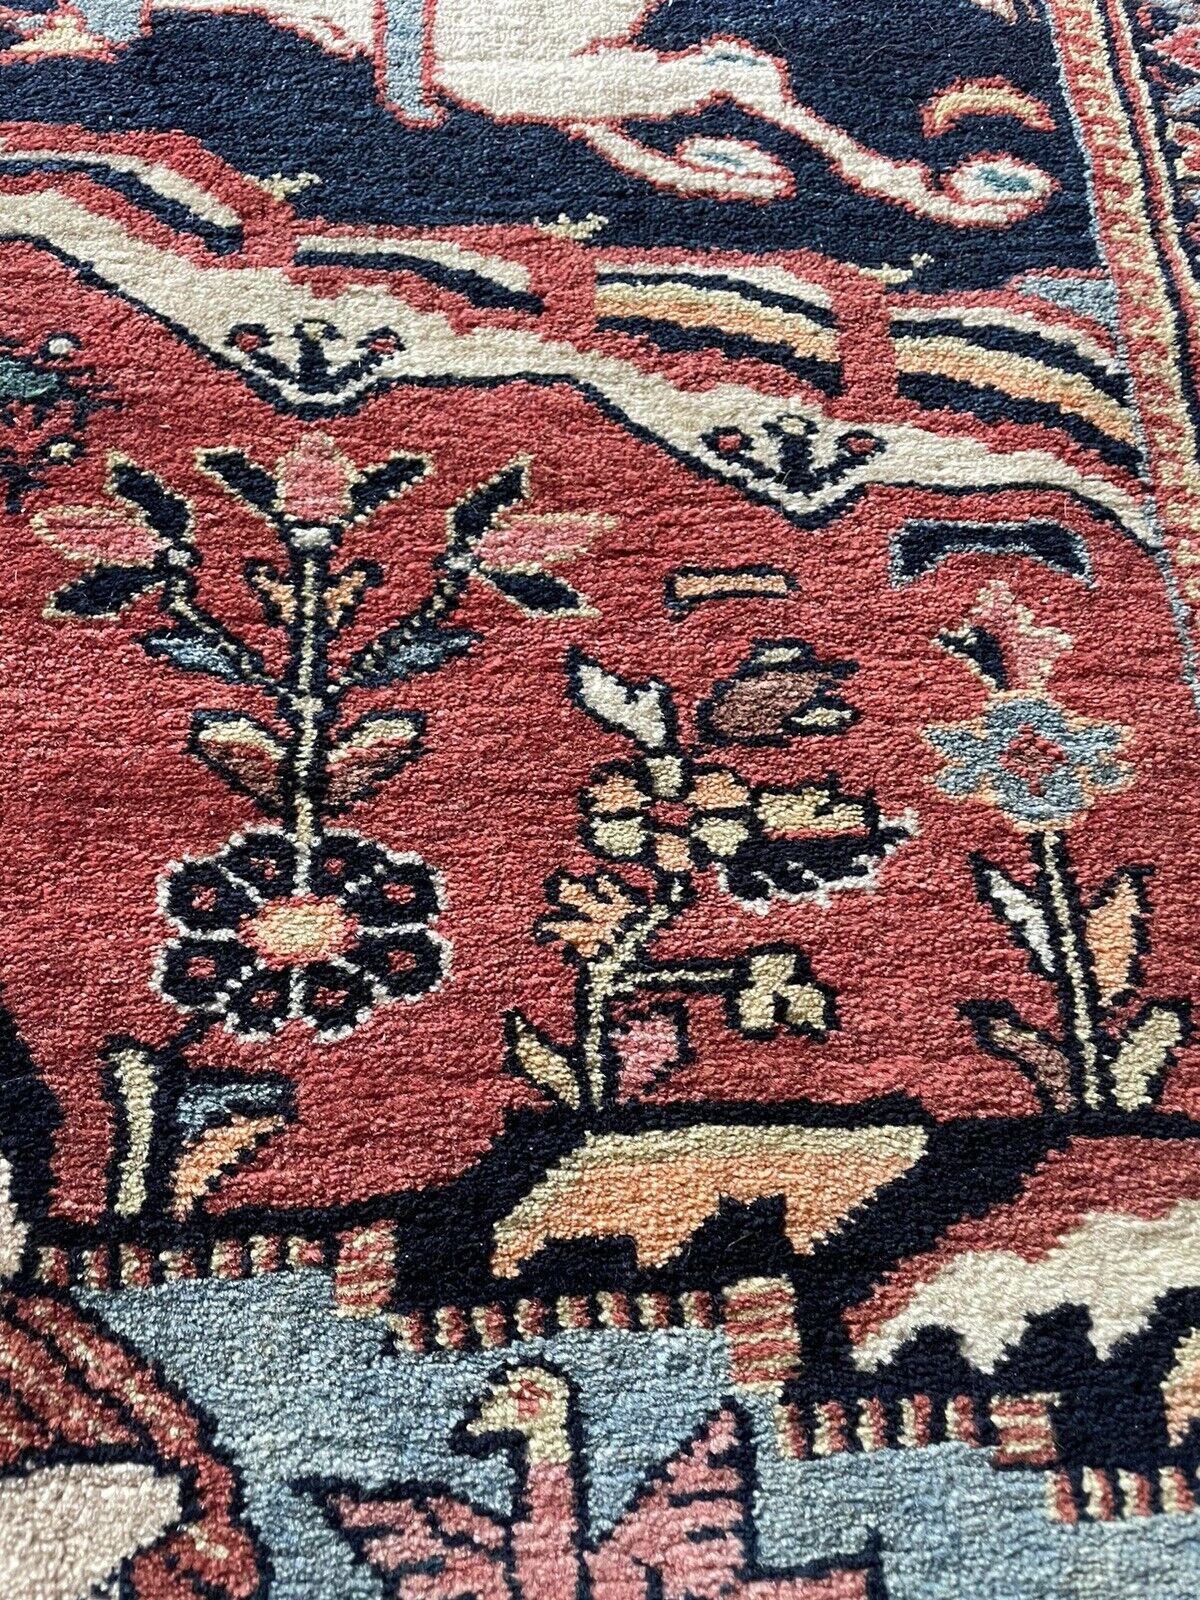 Close-up of authenticity on Handmade Antique Persian Lilihan Collectible Rug - Detailed view showcasing the authenticity of the rug's natural colors and Persian-style design.